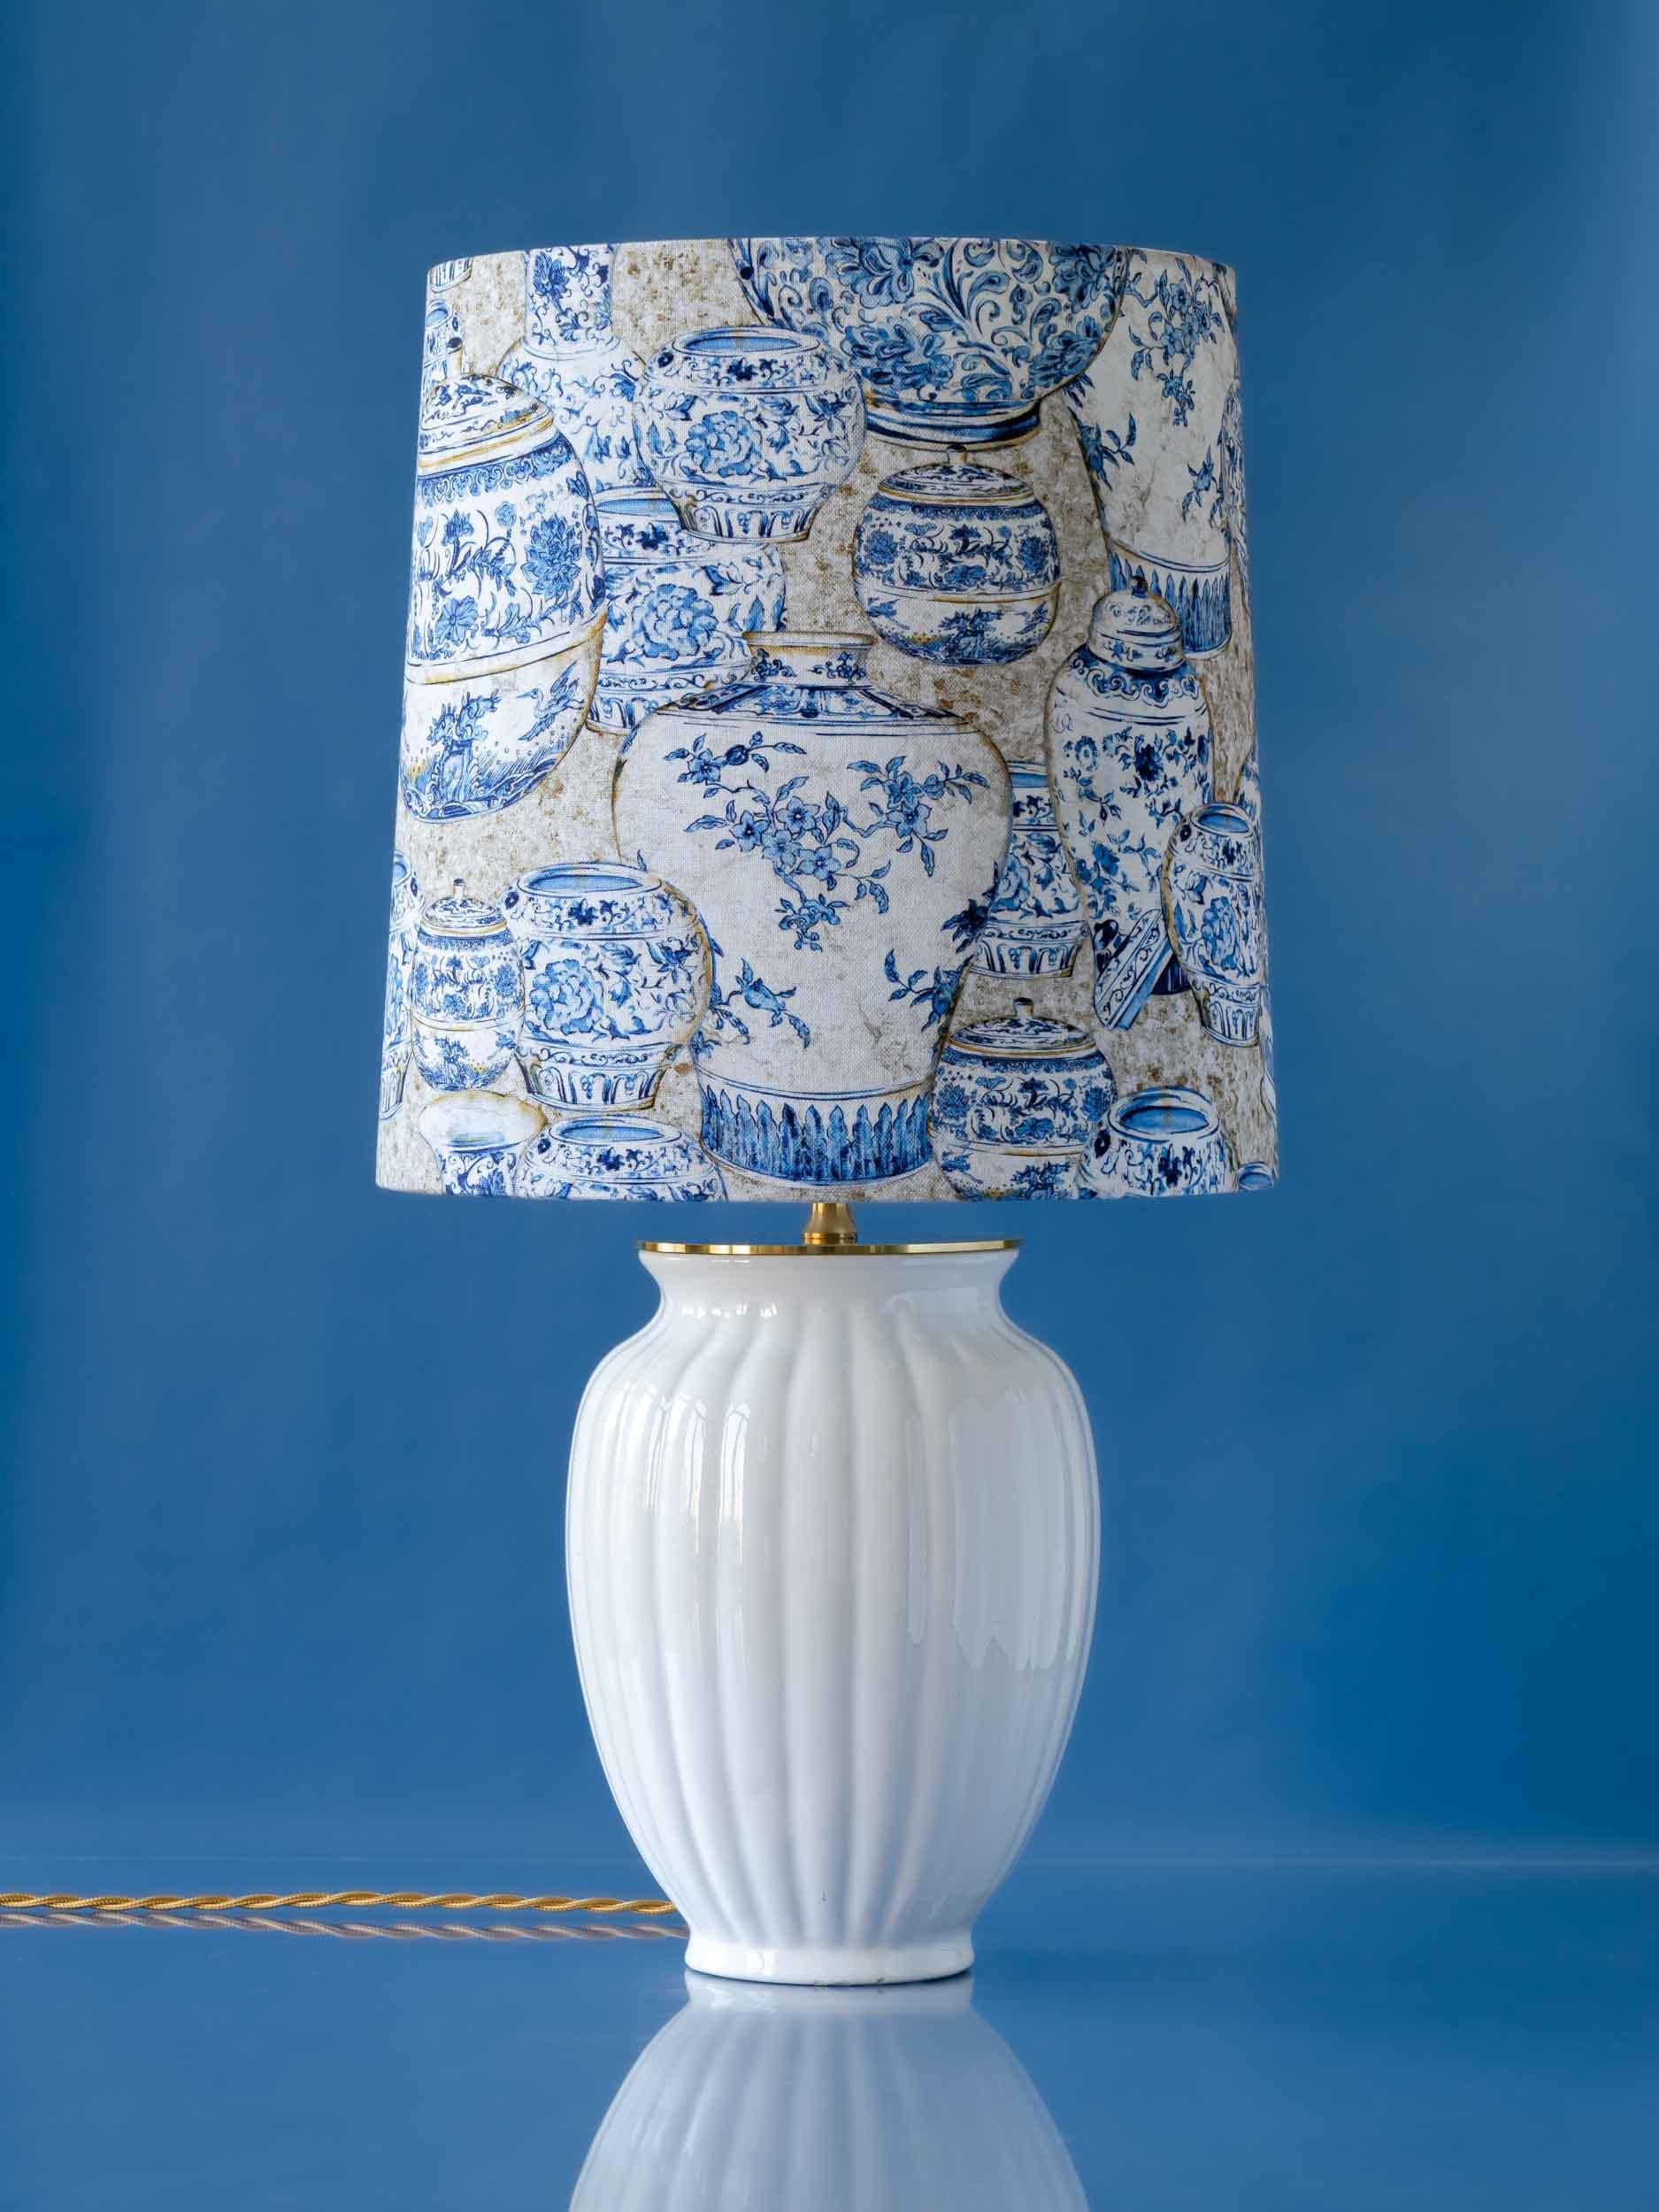 Meet Vasen (which means vases in Dutch, part of the meta vibe of this lamp)—she’s part Amitābha Studio's fresh blue and white series of one-of-a-kind table lamps. Flipping things on their head, we’ve paired vintage Delft White vases with custom made